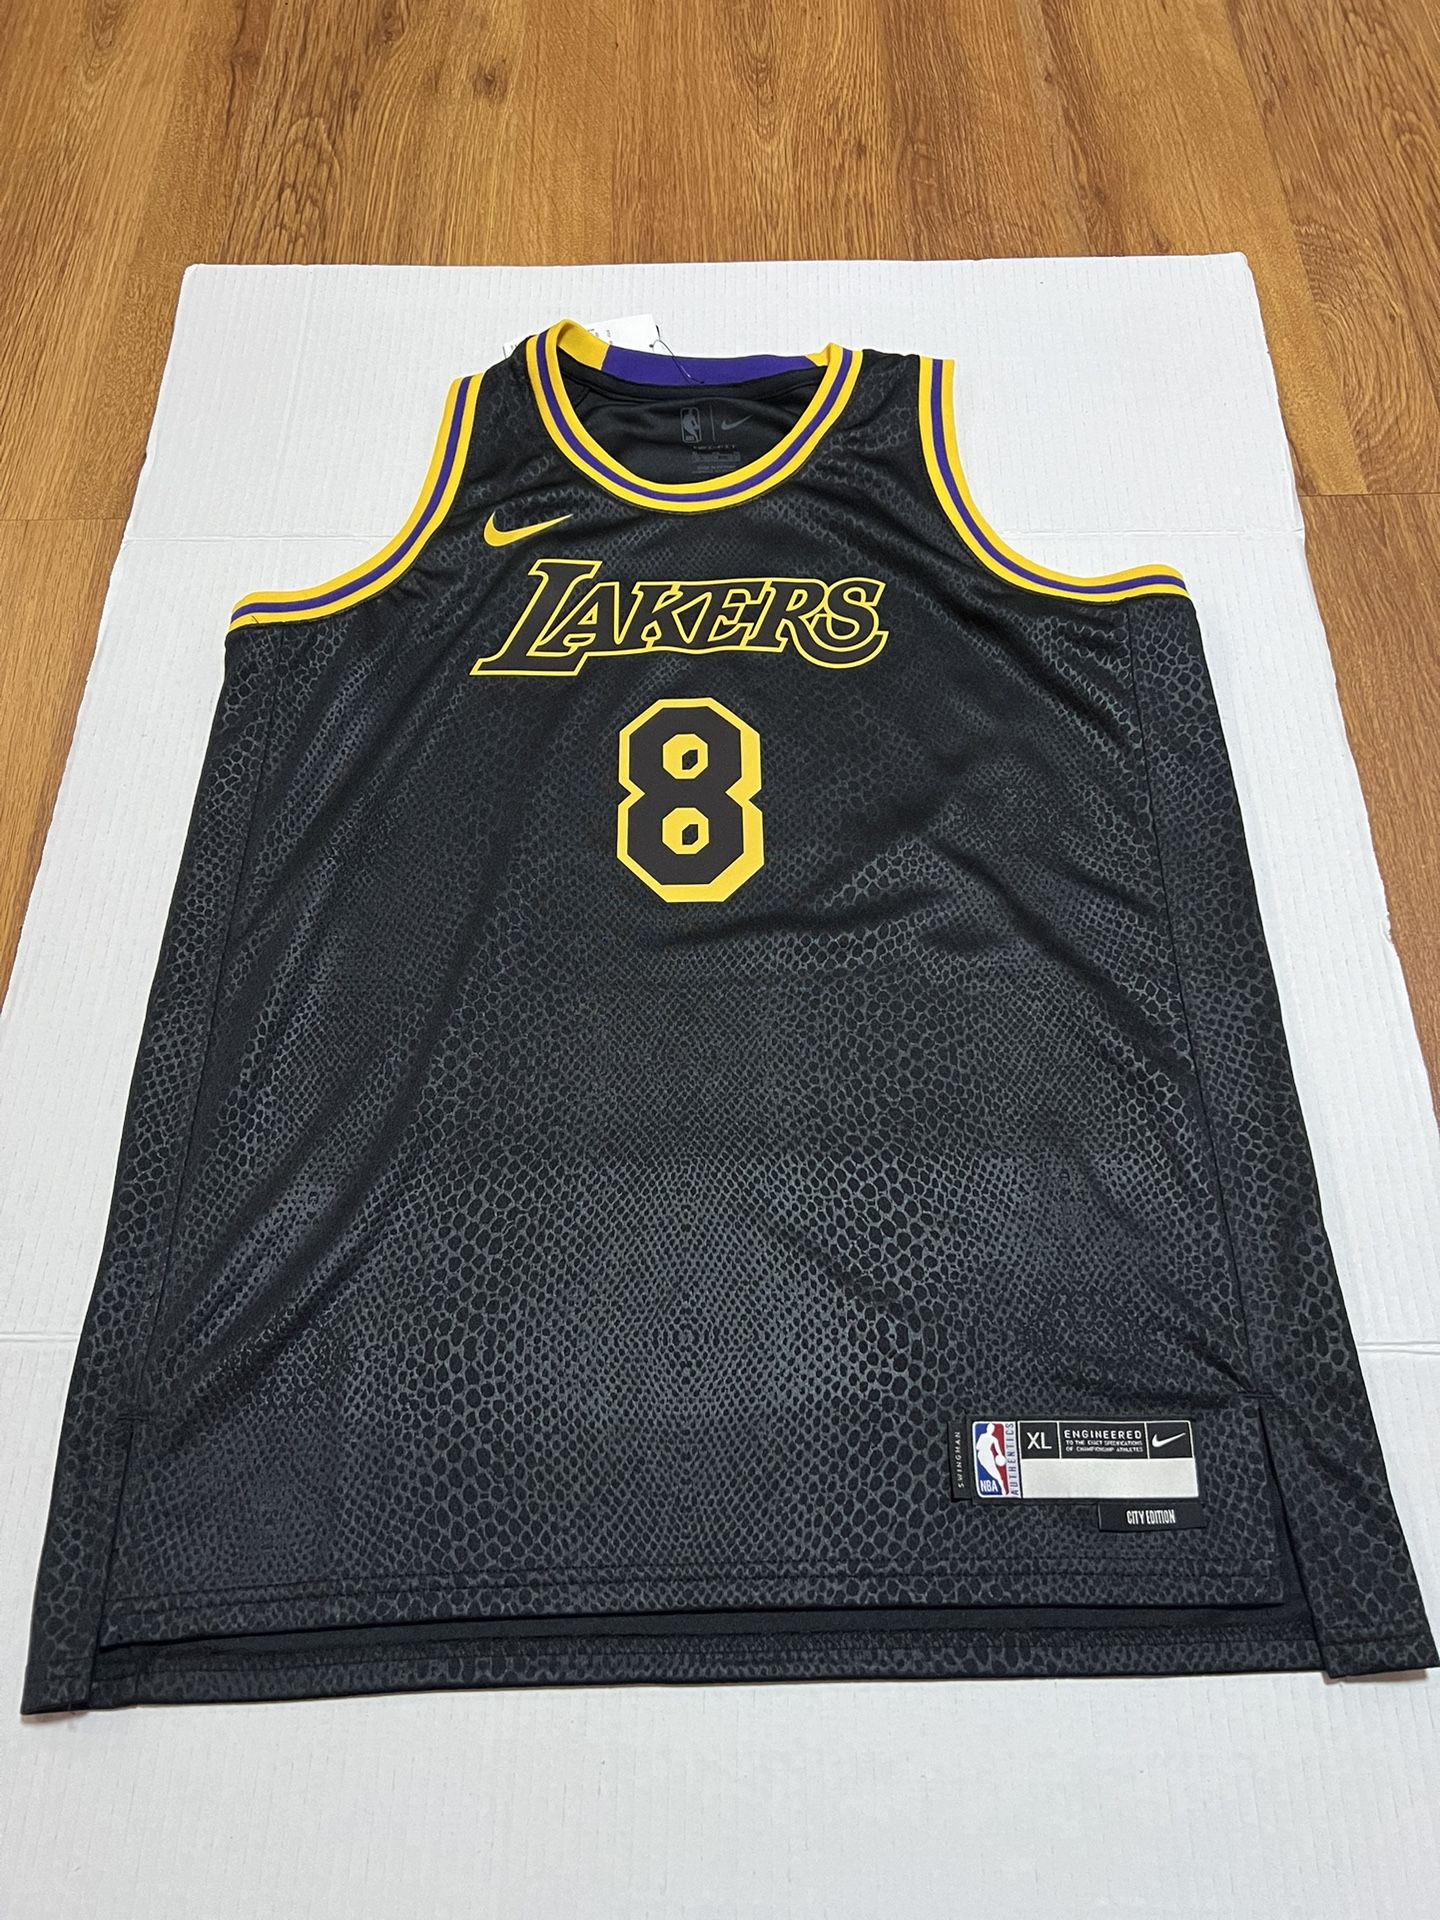 🔥🔥New Kobe Bryant Los Angeles Lakers Nike Black City Edition Jersey Youth XL